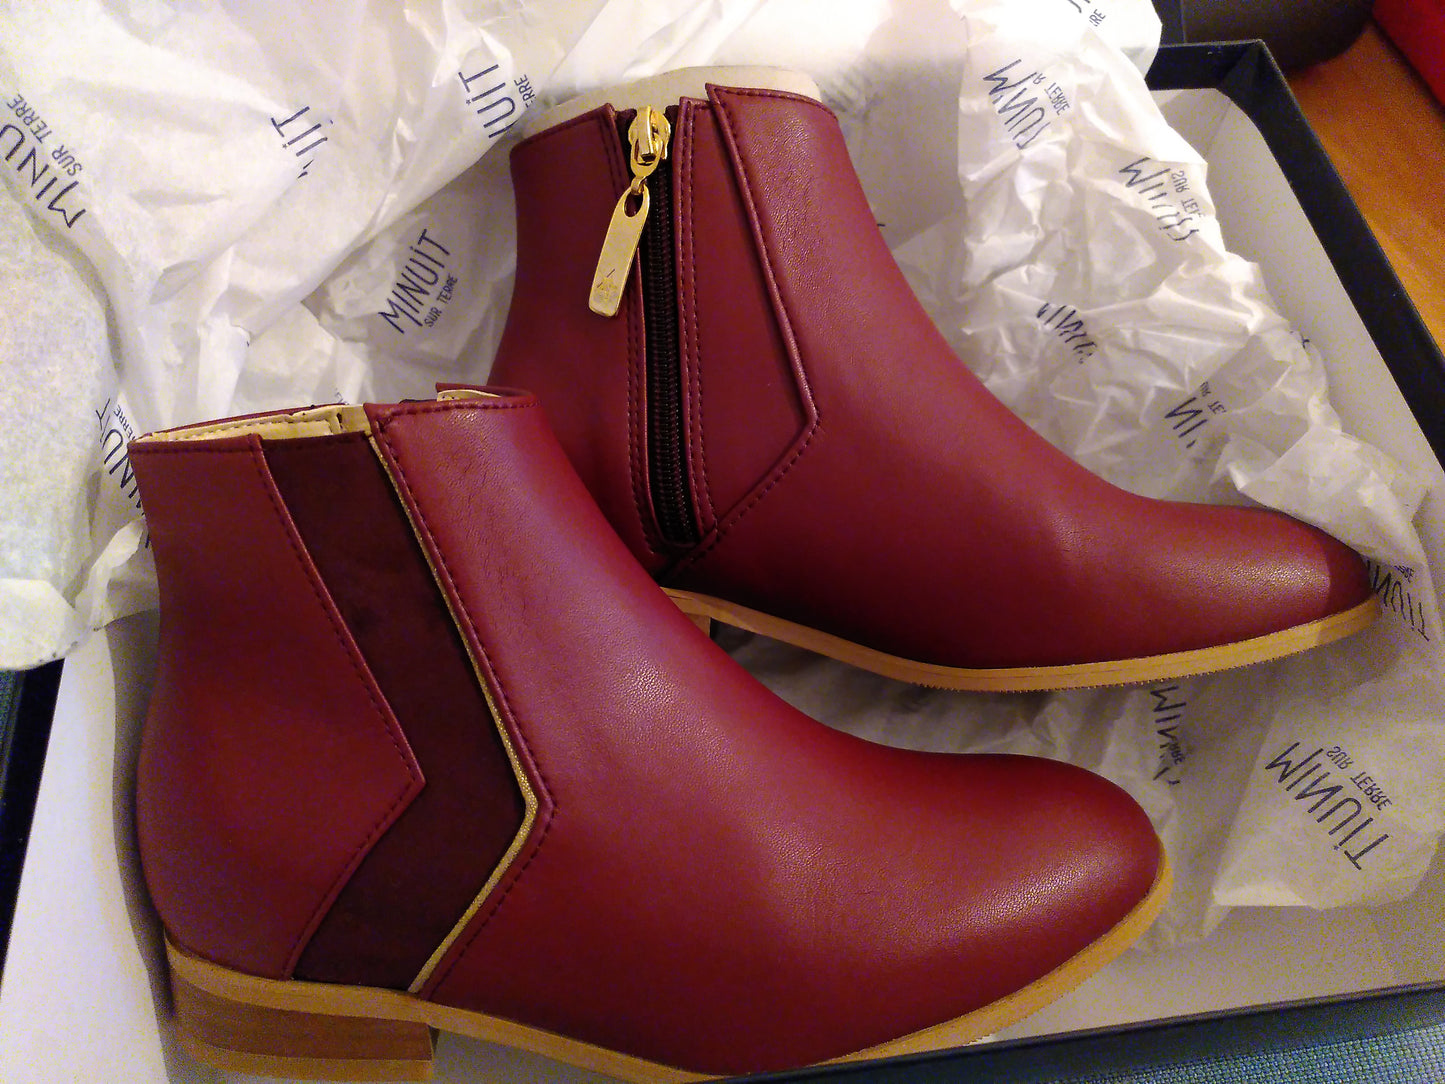 Grand Cru ankle boots